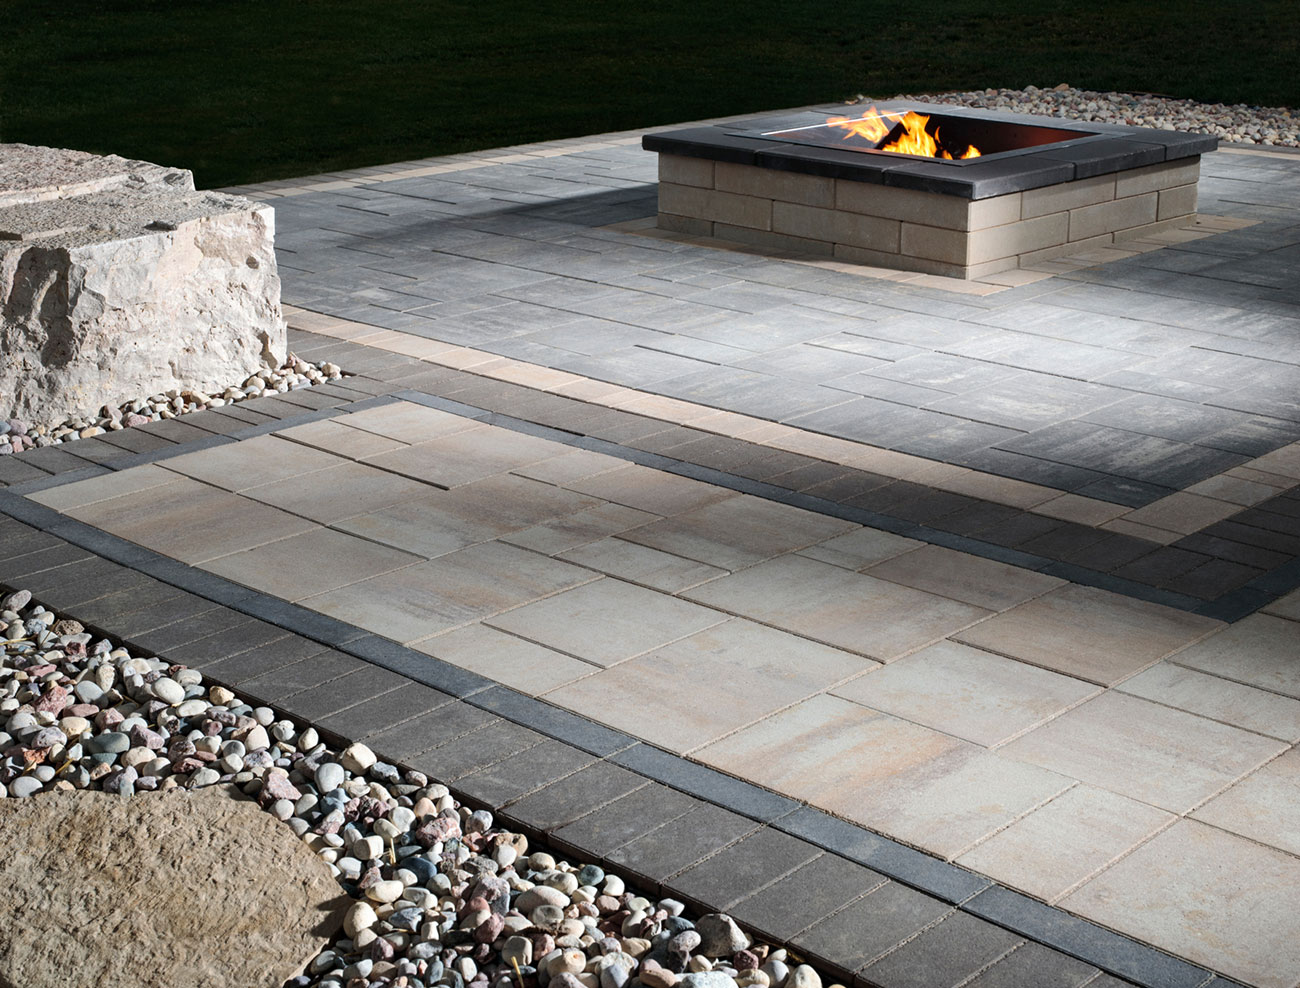 Belgard® Products - Check them out!